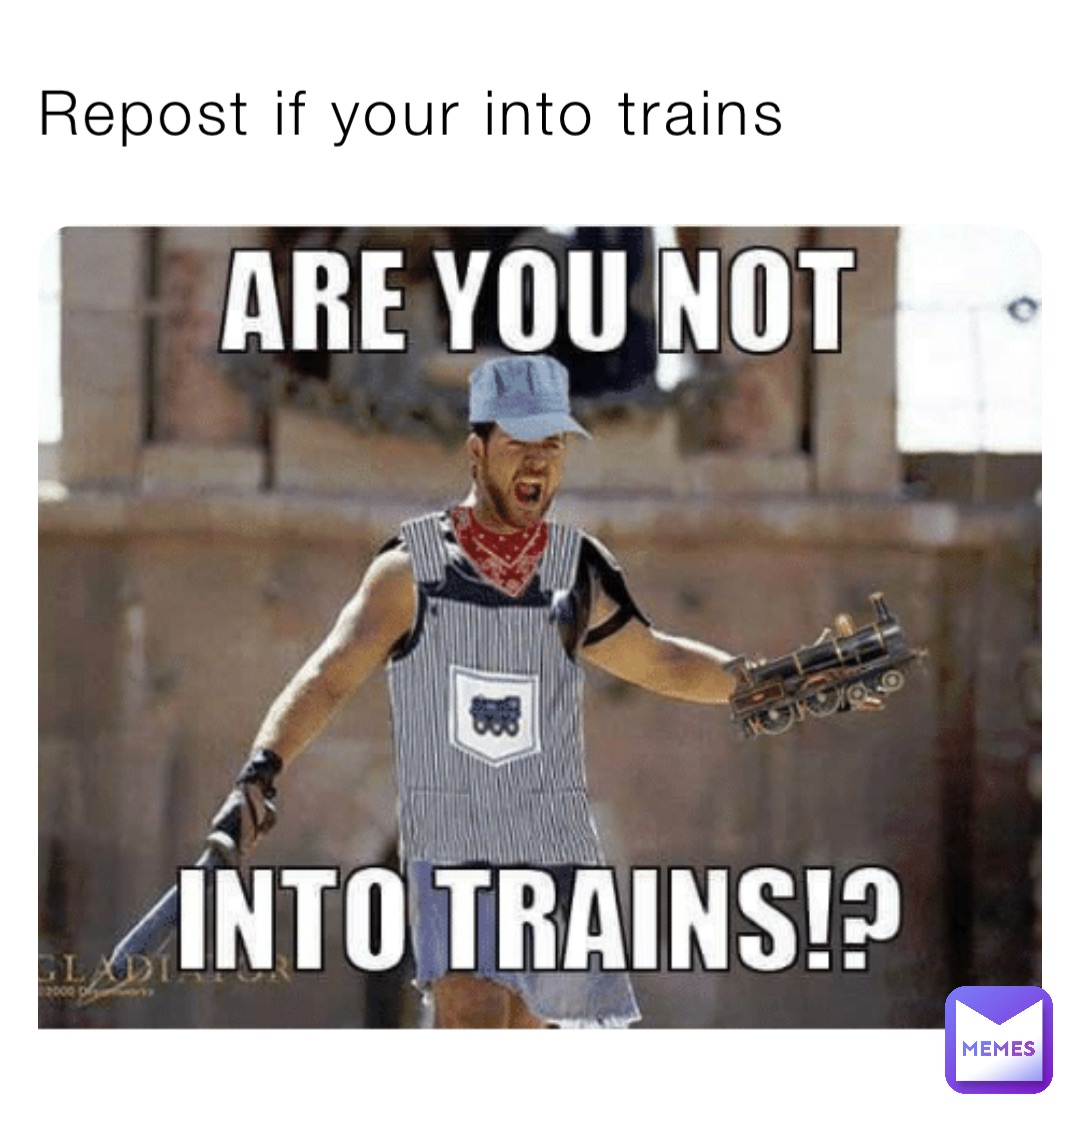 Repost if your into trains